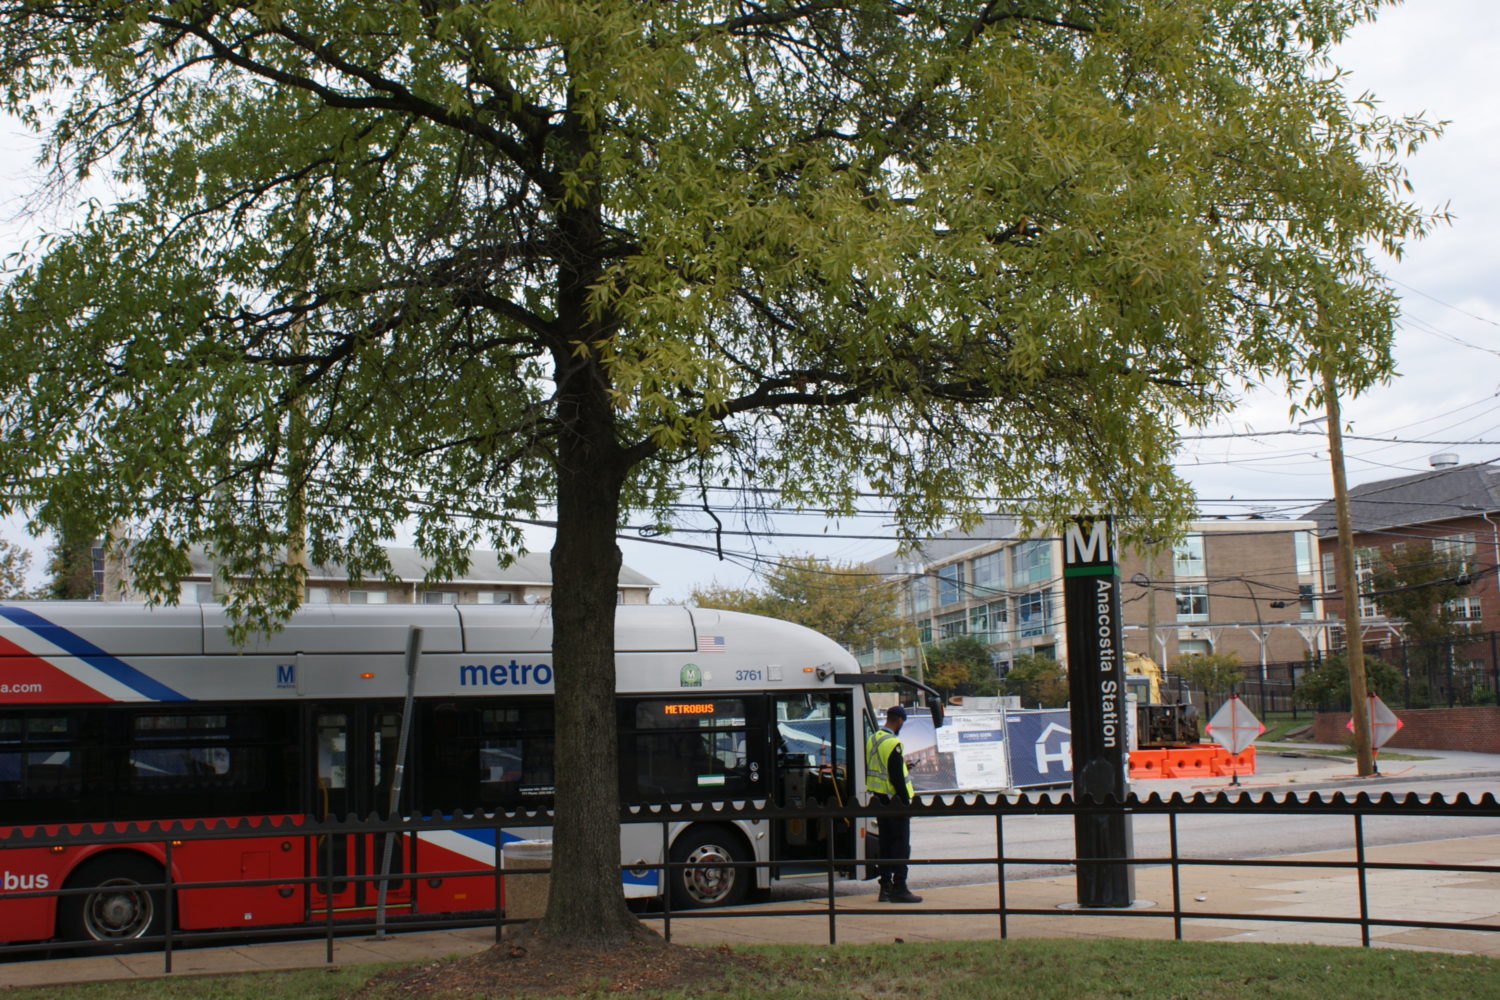 A Metro bus parked outside the Anacostia station.